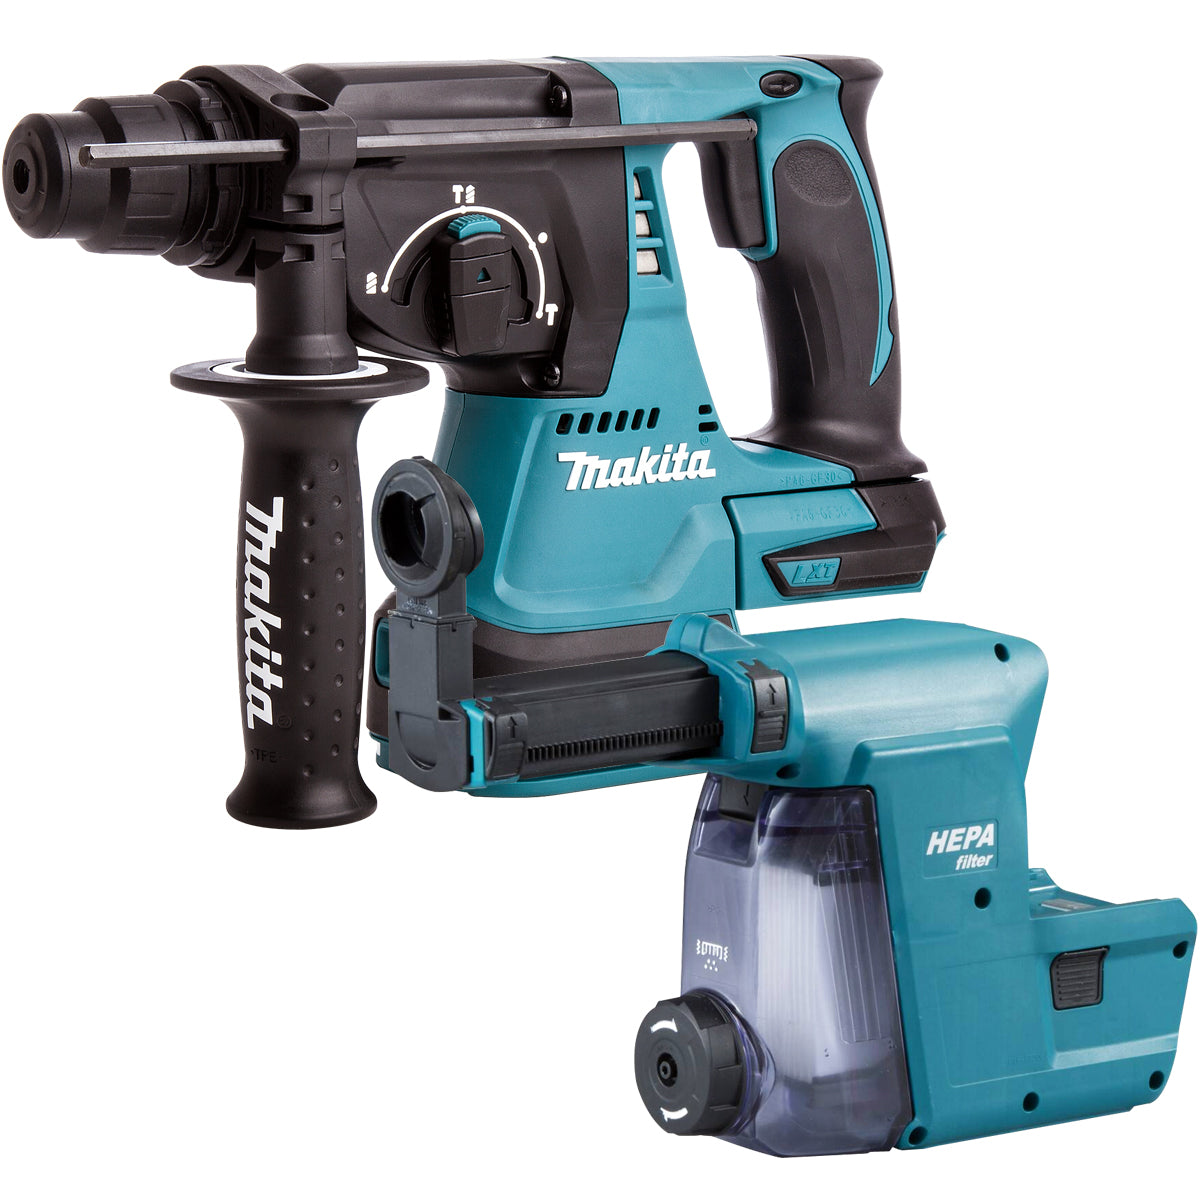 Makita DHR242Z 18V SDS+ Brushless 24mm Rotary Hammer Drill Body with Dust Extraction System